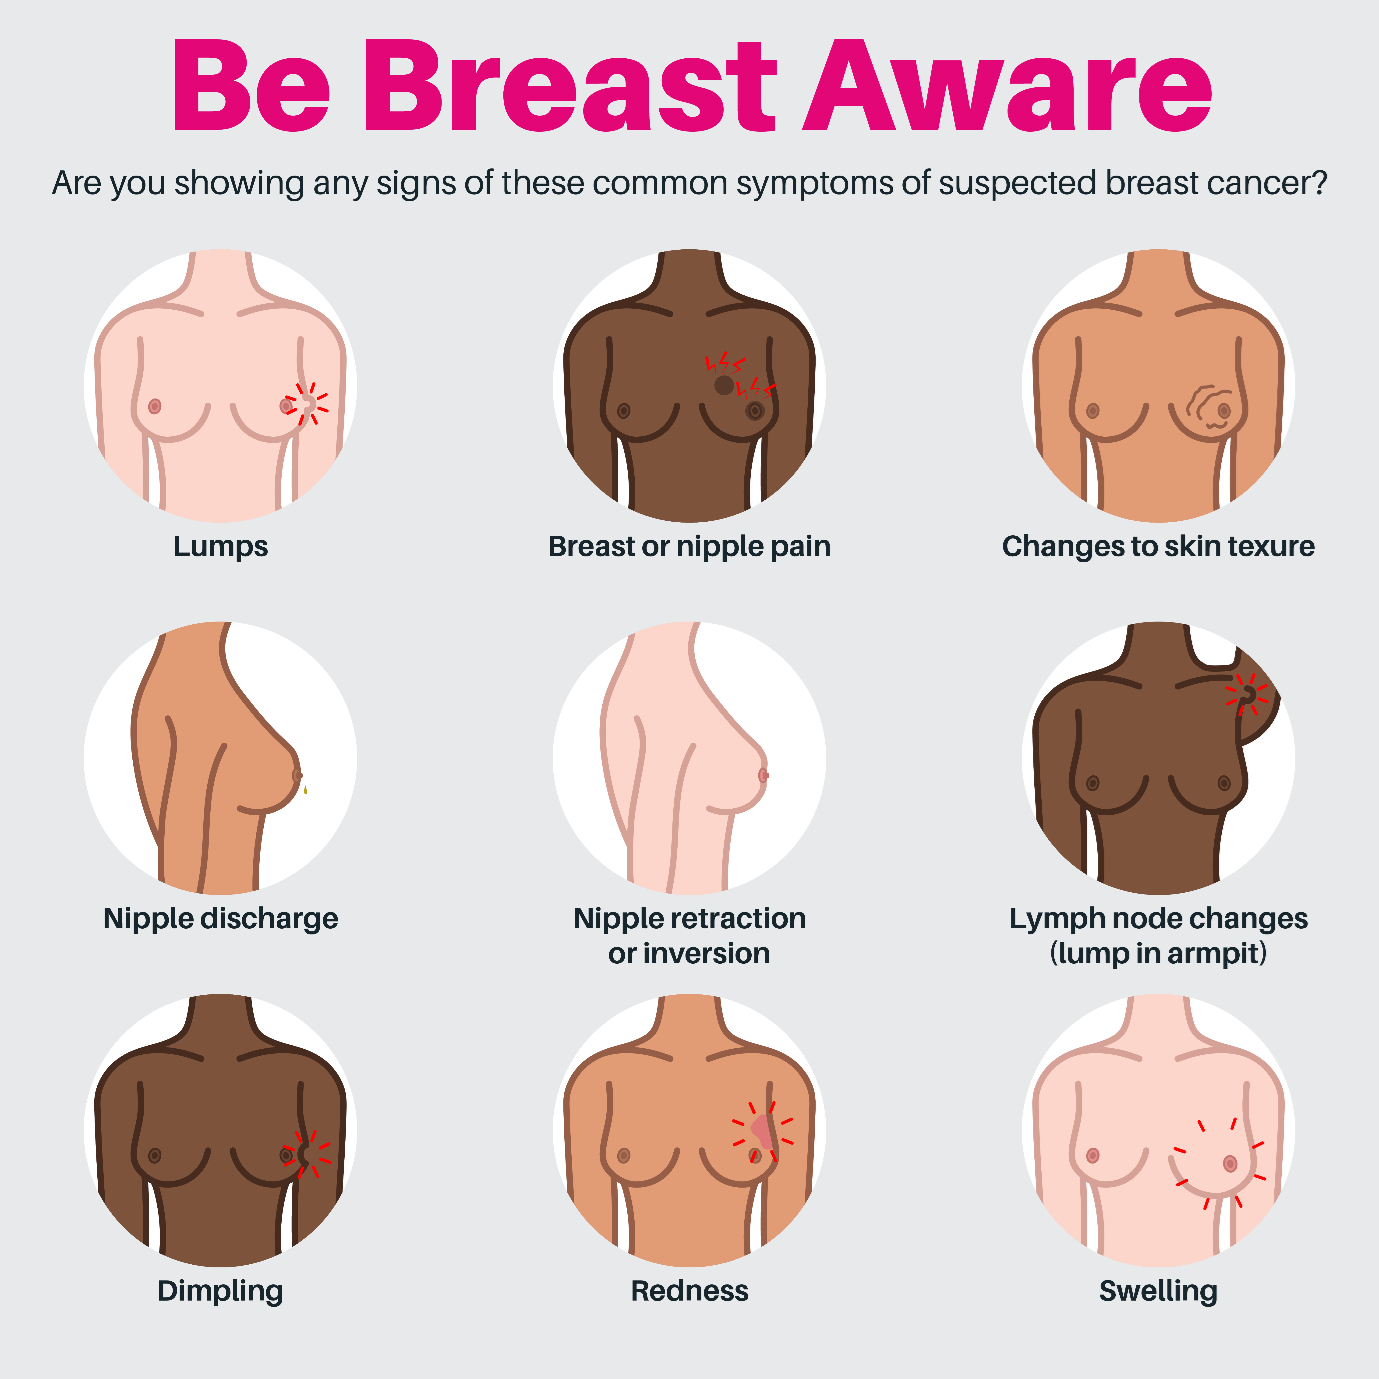 https://www.pushdoctor.co.uk/hs-fs/hubfs/Breast-cancer.png?width=1379&height=1379&name=Breast-cancer.png